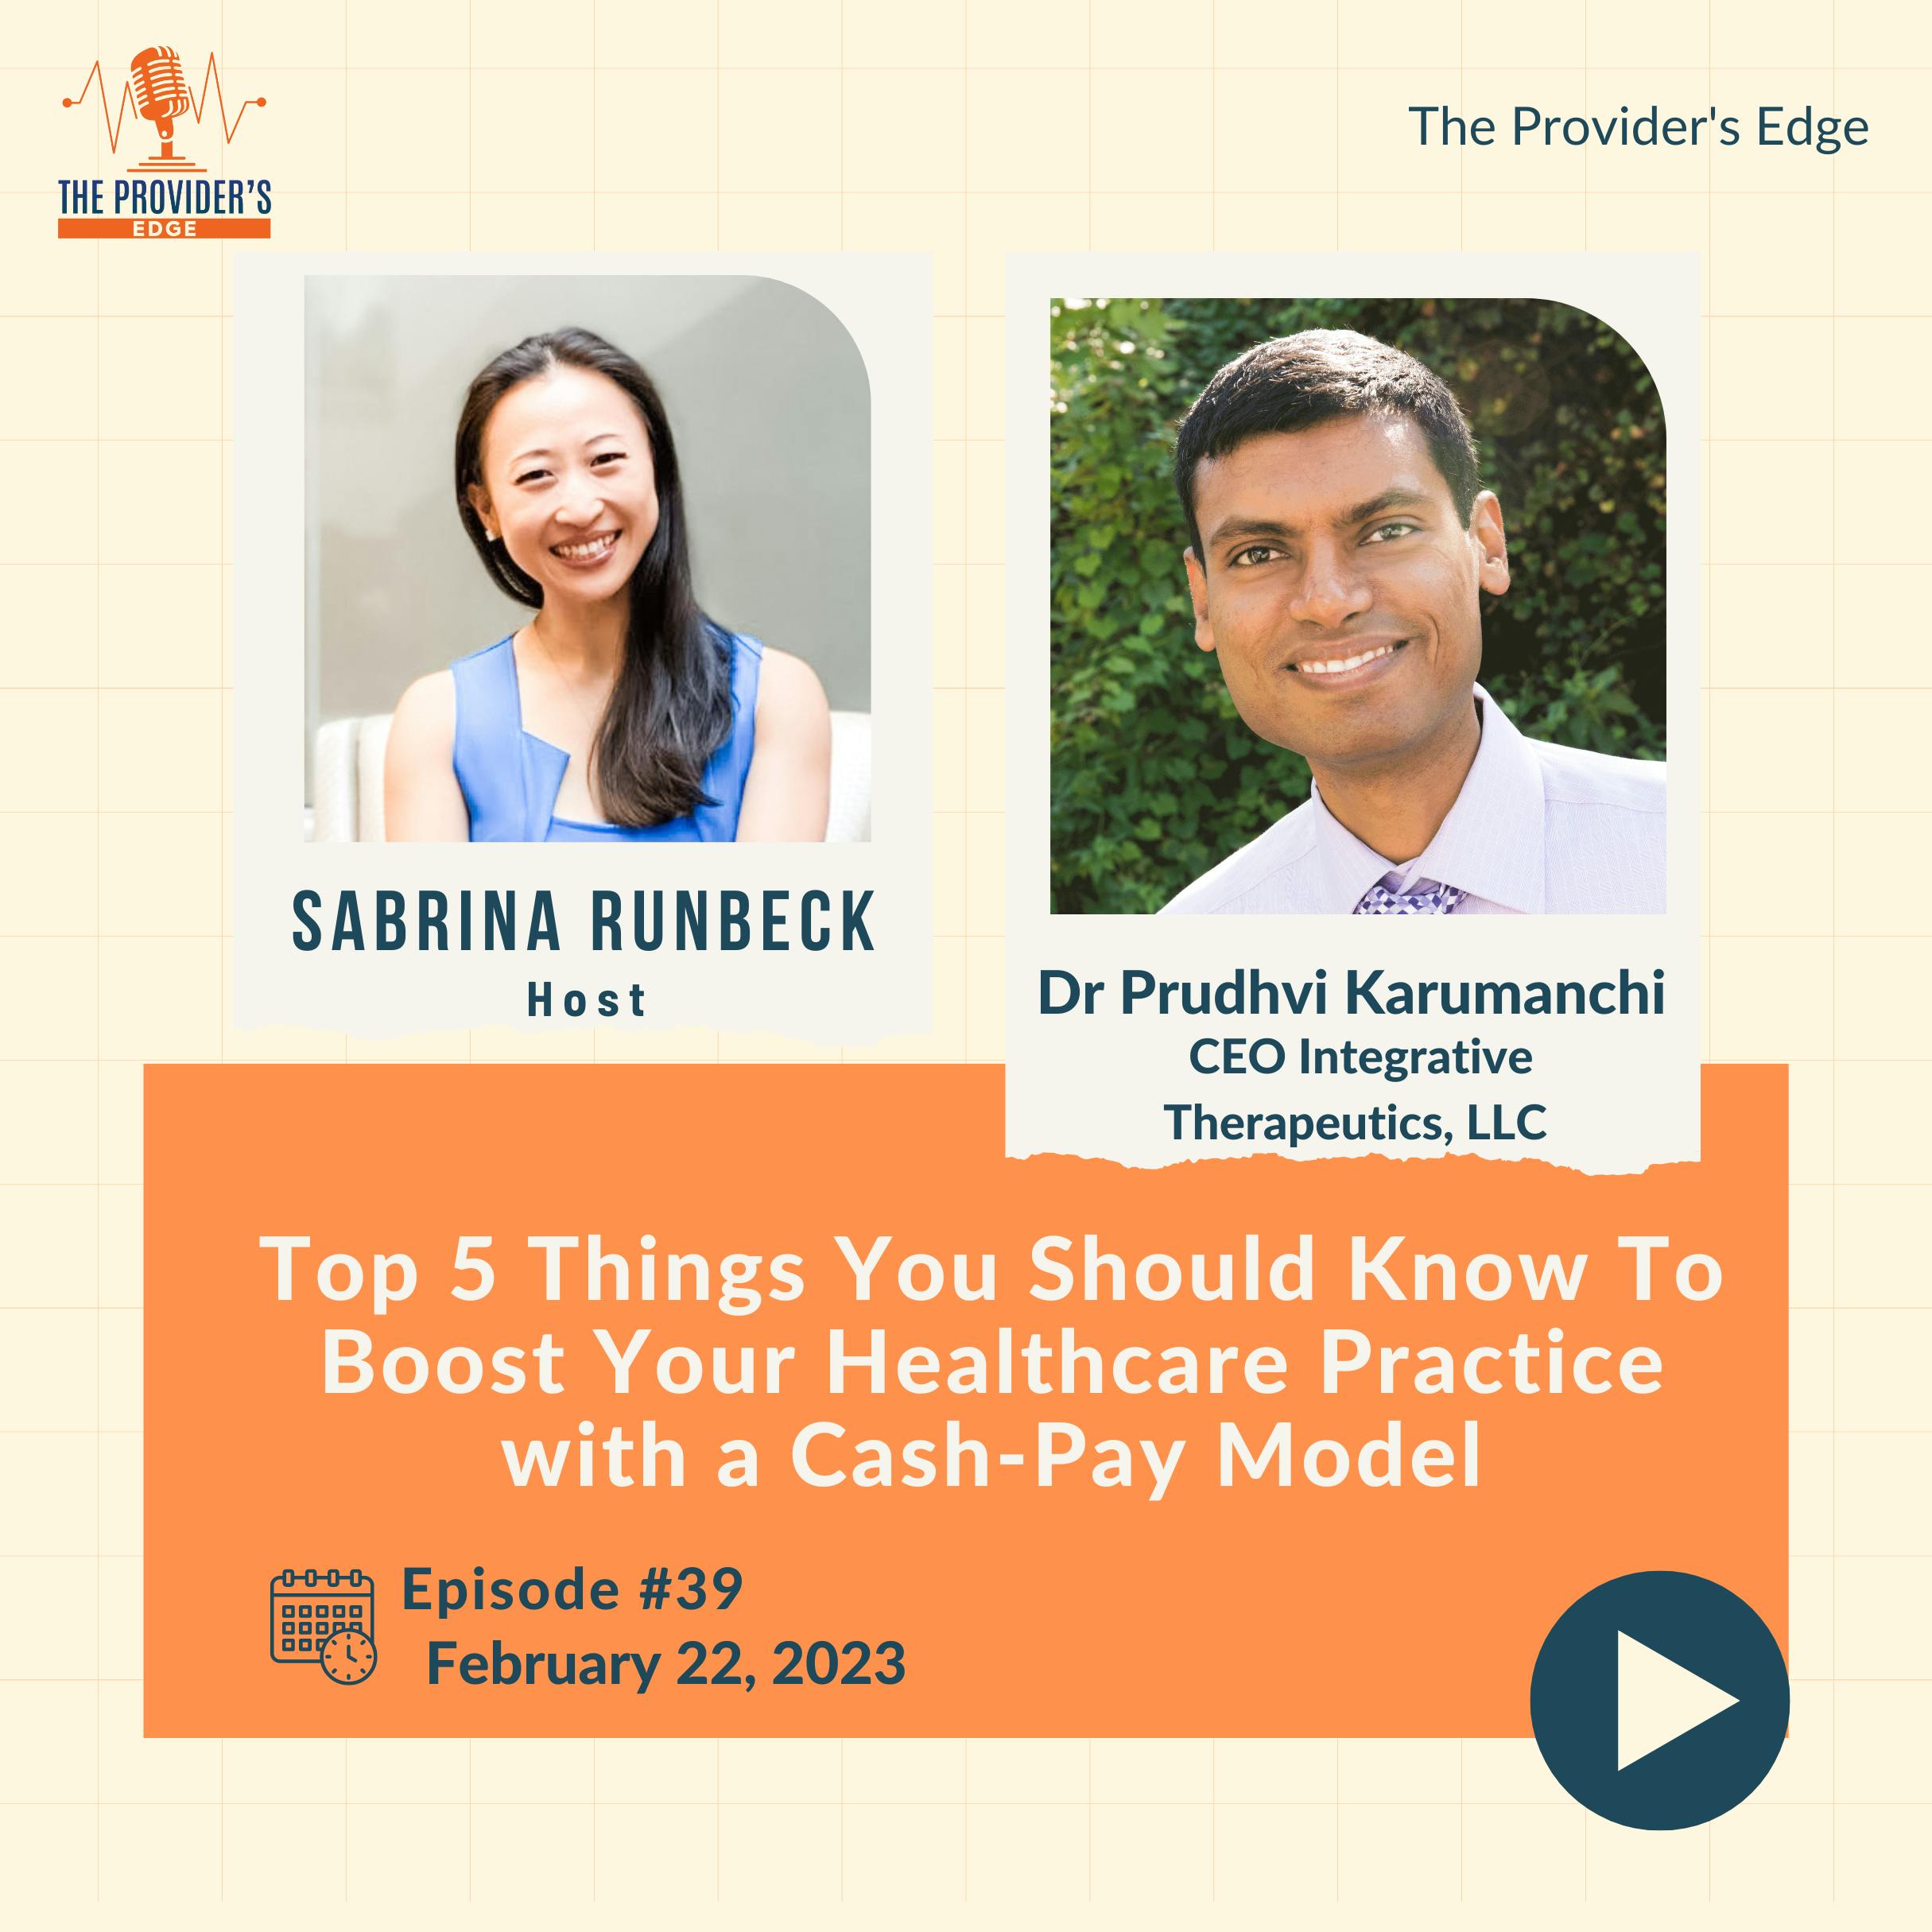 Top 5 Things You Should Know To Boost Your Healthcare Practice with a Cash-Pay Model